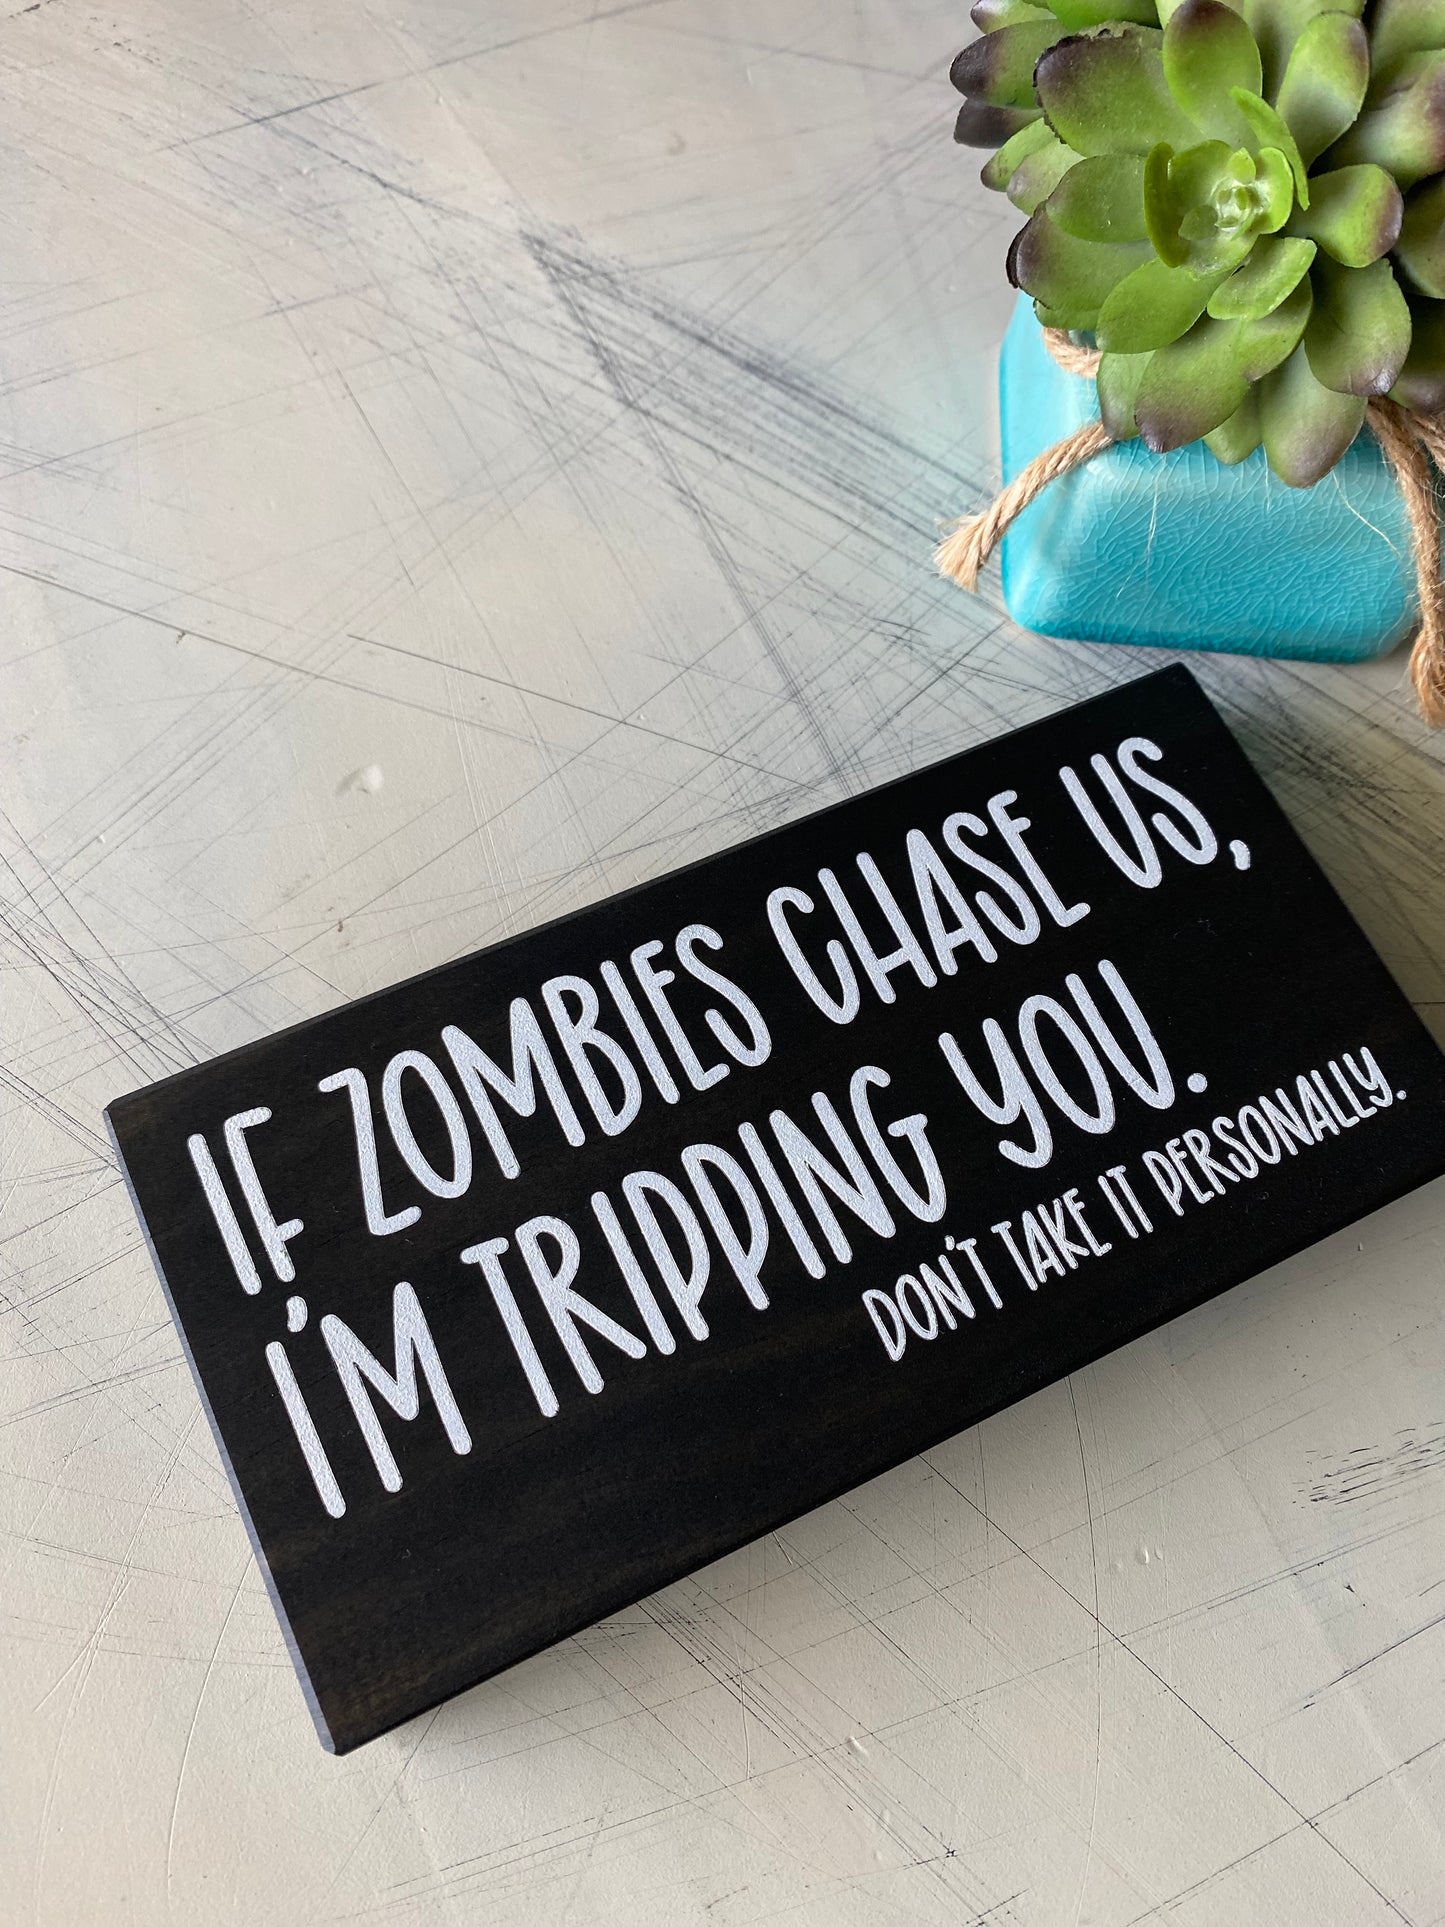 If zombies chase us, I'm tripping you. Don't take it personally. - Handmade mini wood sign